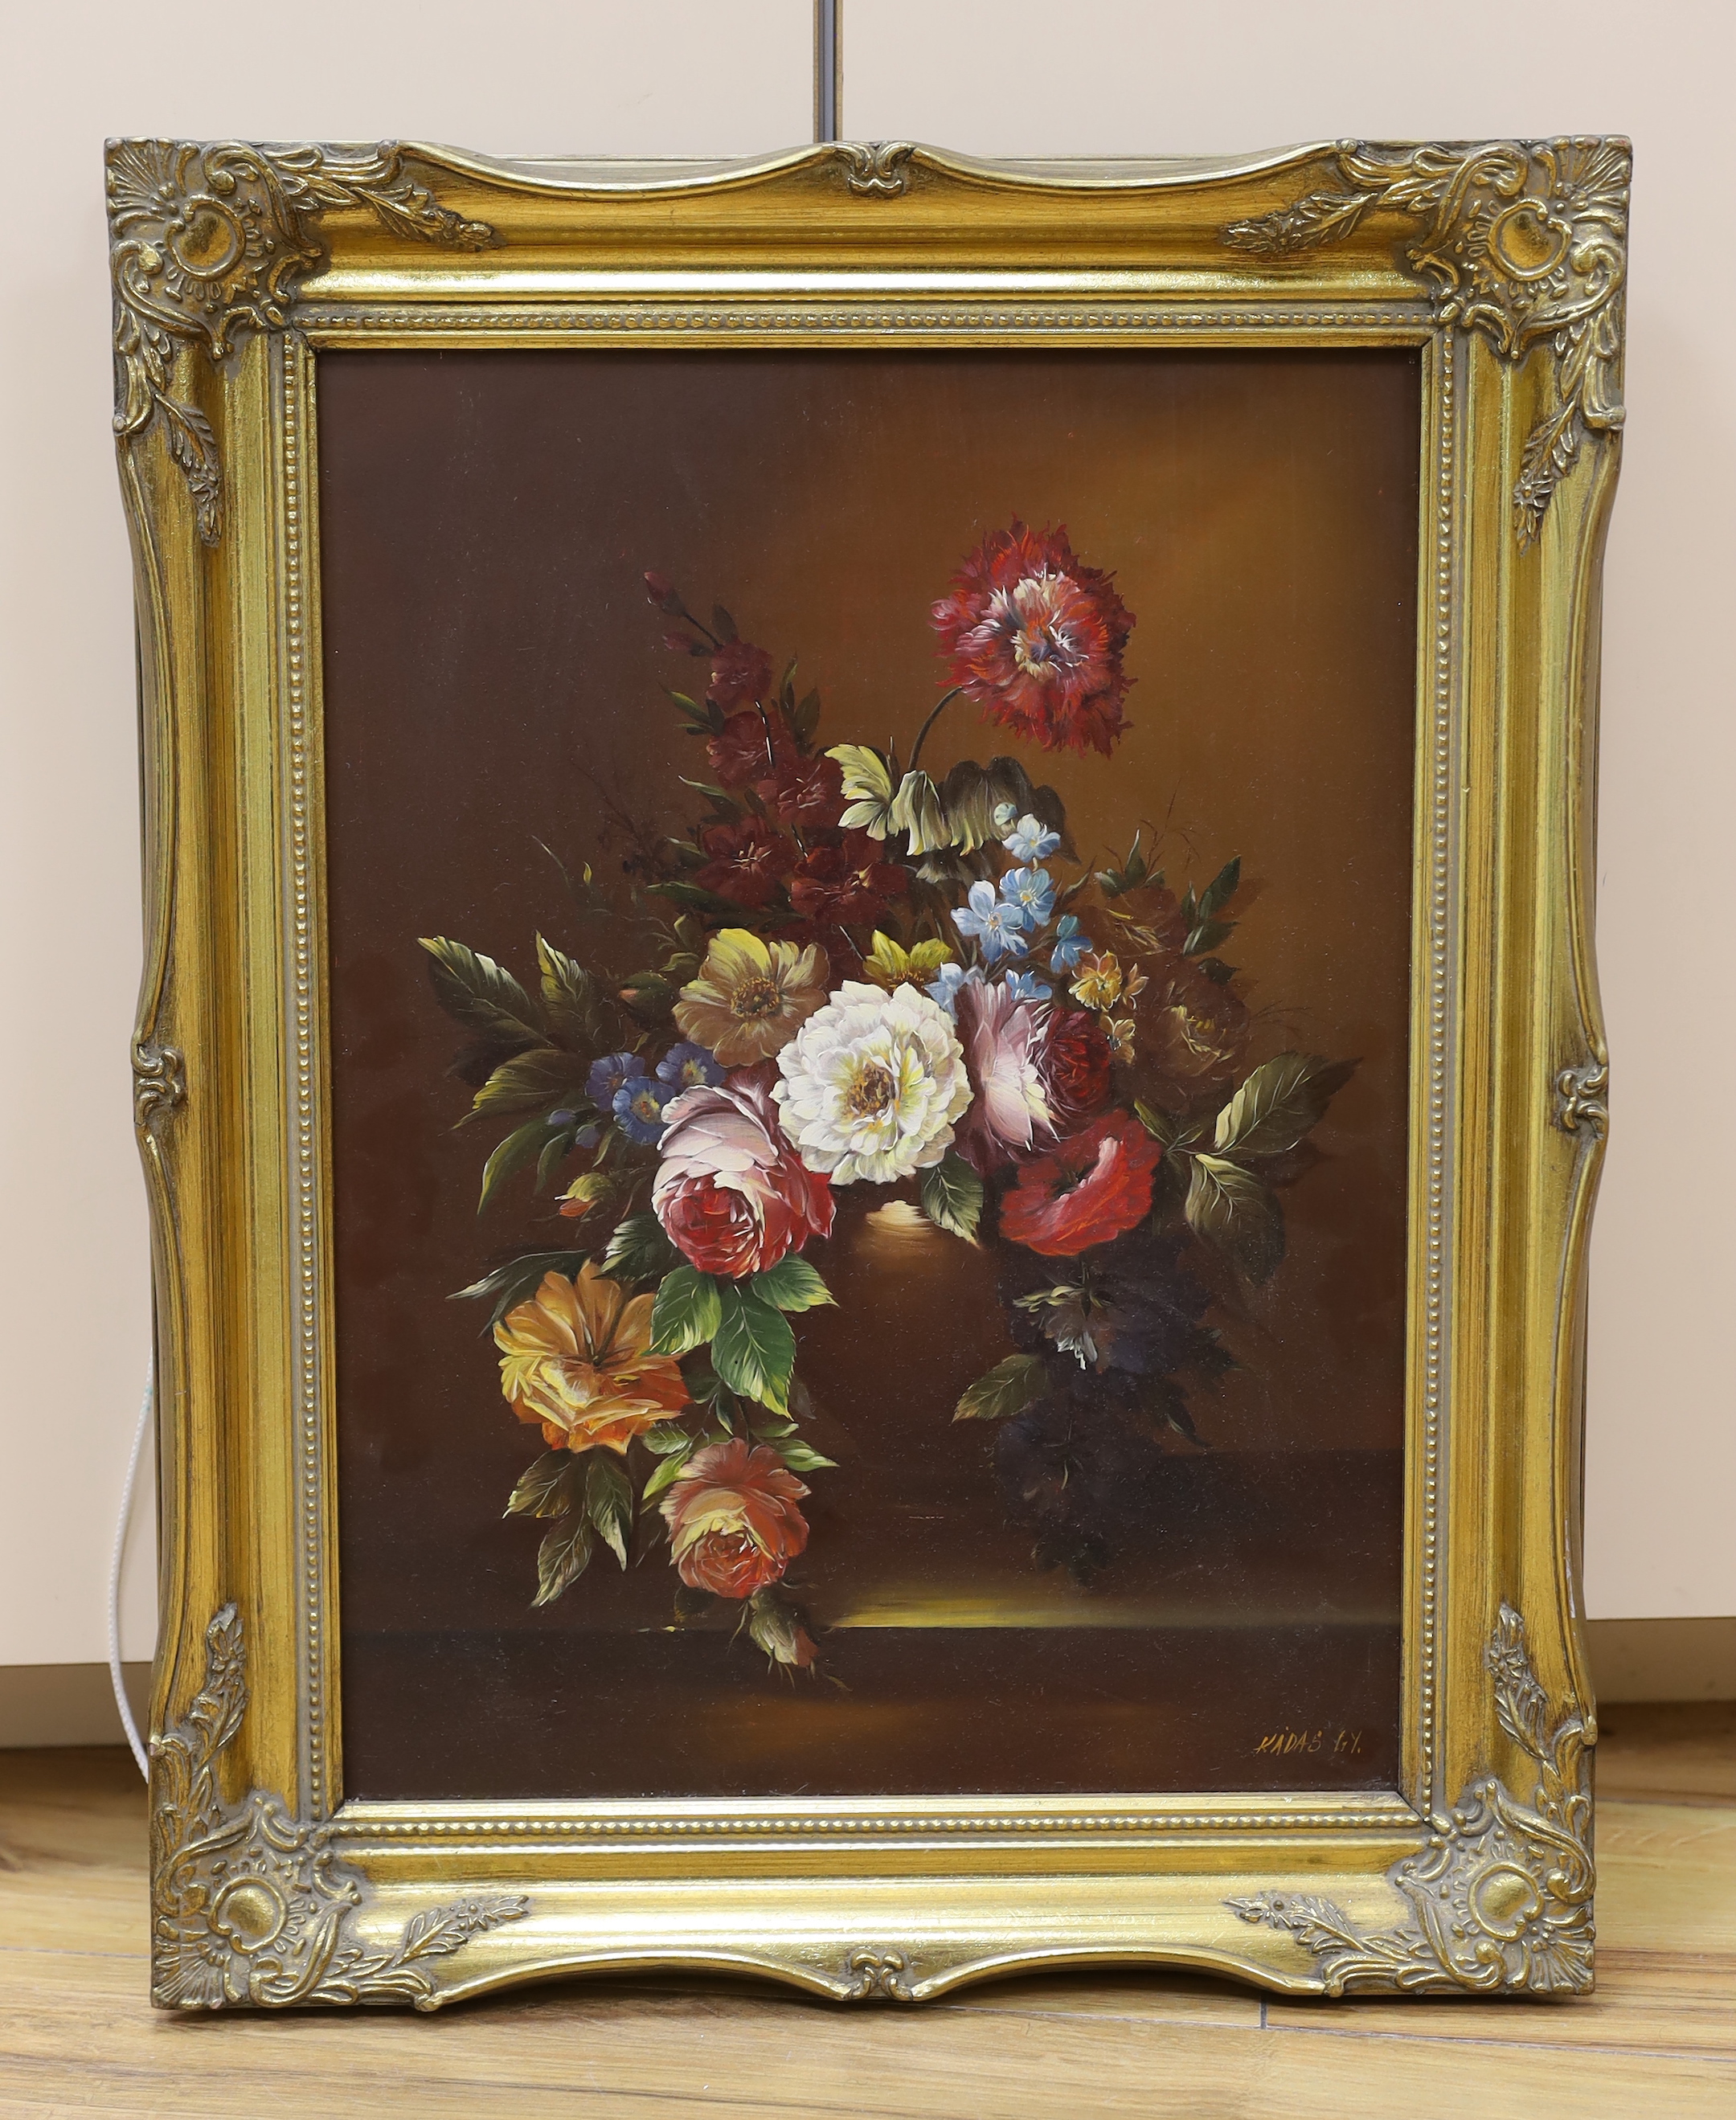 Kadas, oil on board, Still life of flowers in a vase, signed and dated '67, 39 x 29cm, gilt frame